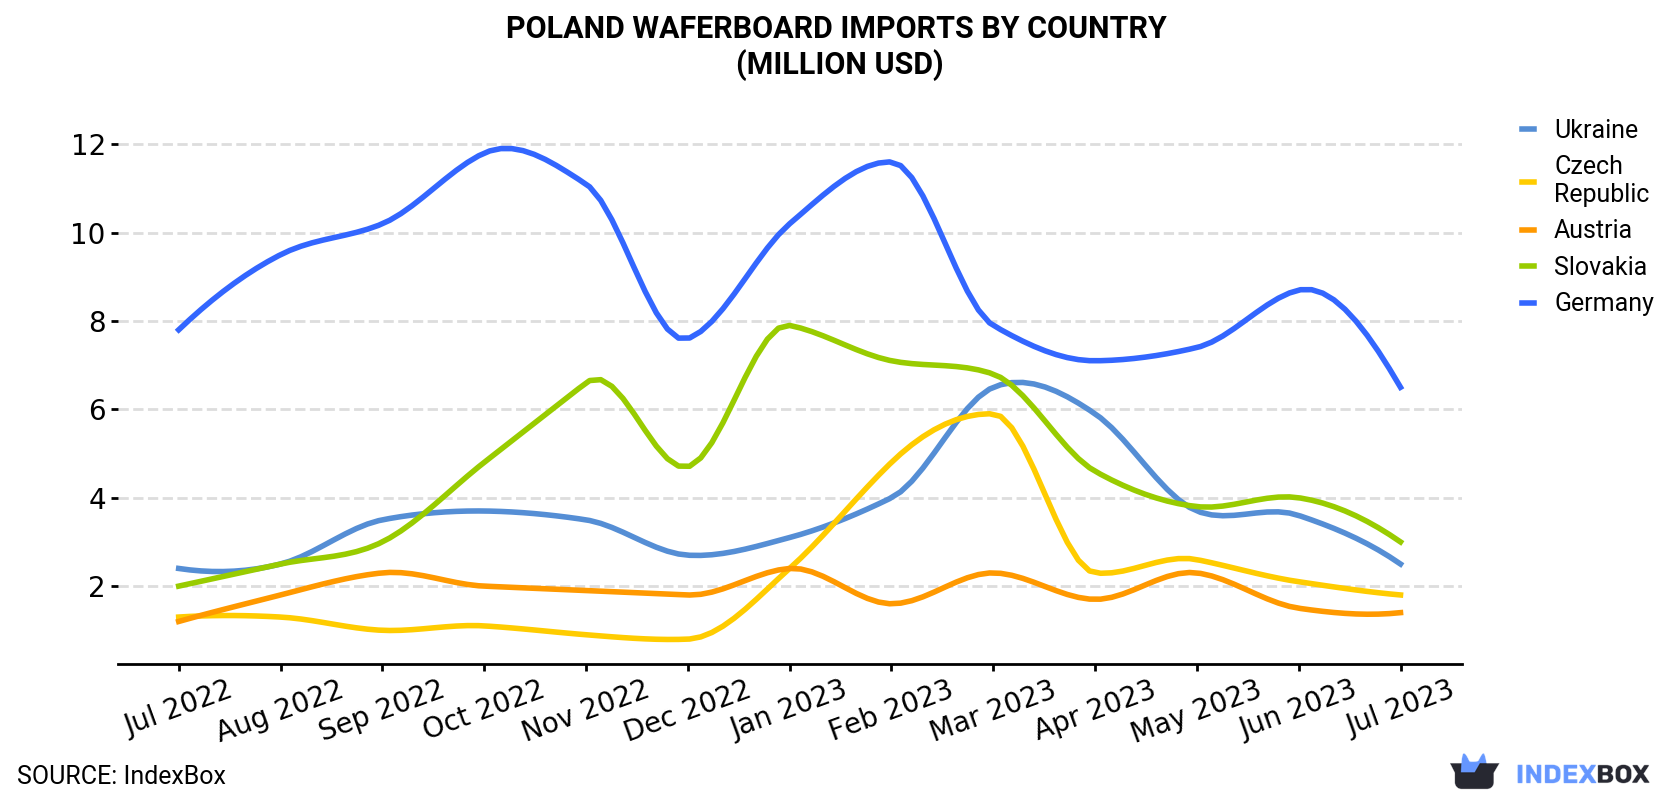 Poland Waferboard Imports By Country (Million USD)